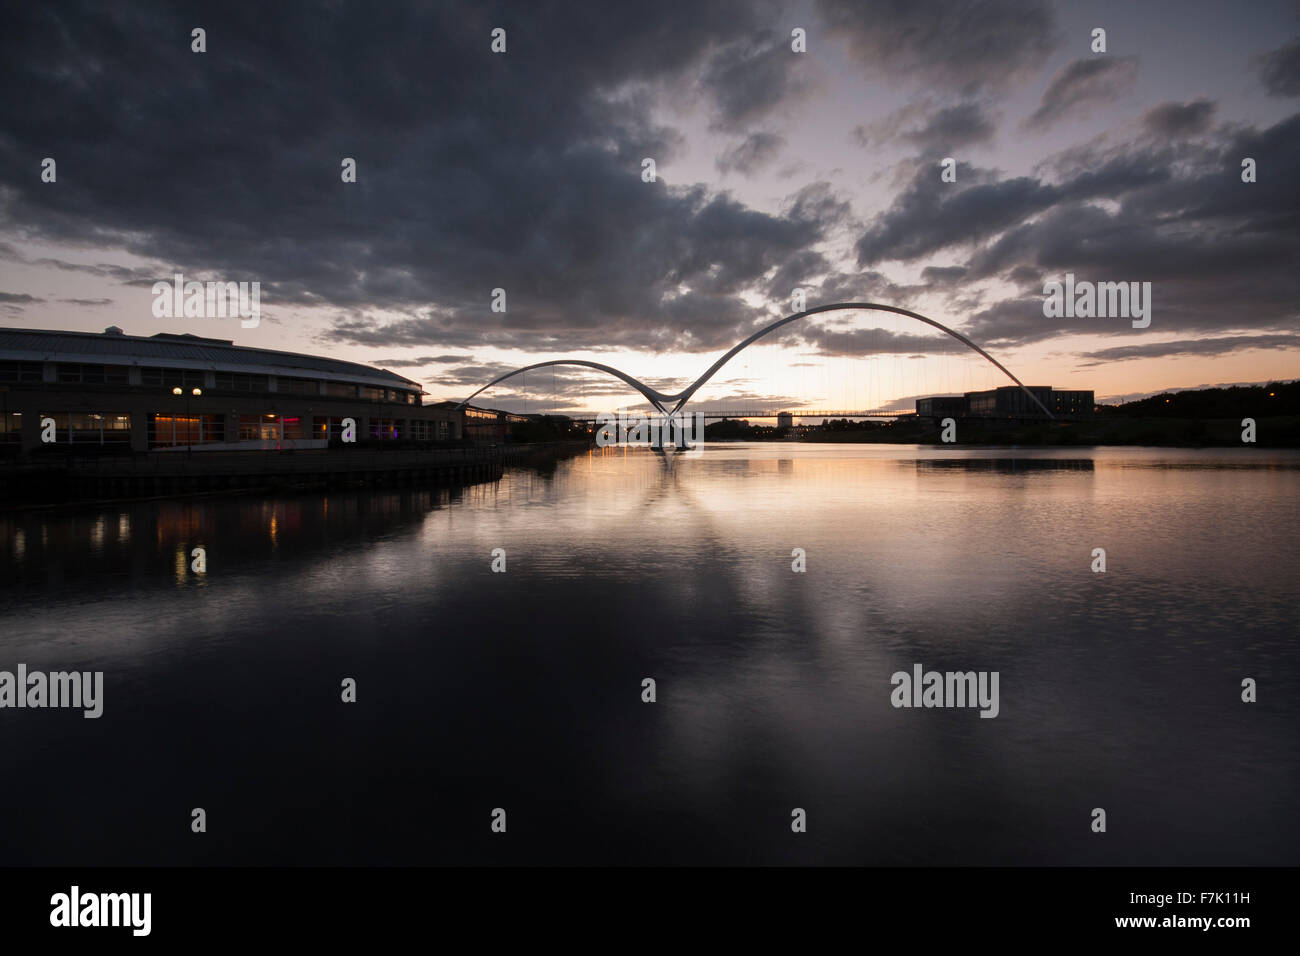 View of Infinity Bridge at dusk time in the borough of Stockton-on-Tees,north east England,UK showing dark,foreboding skies Stock Photo